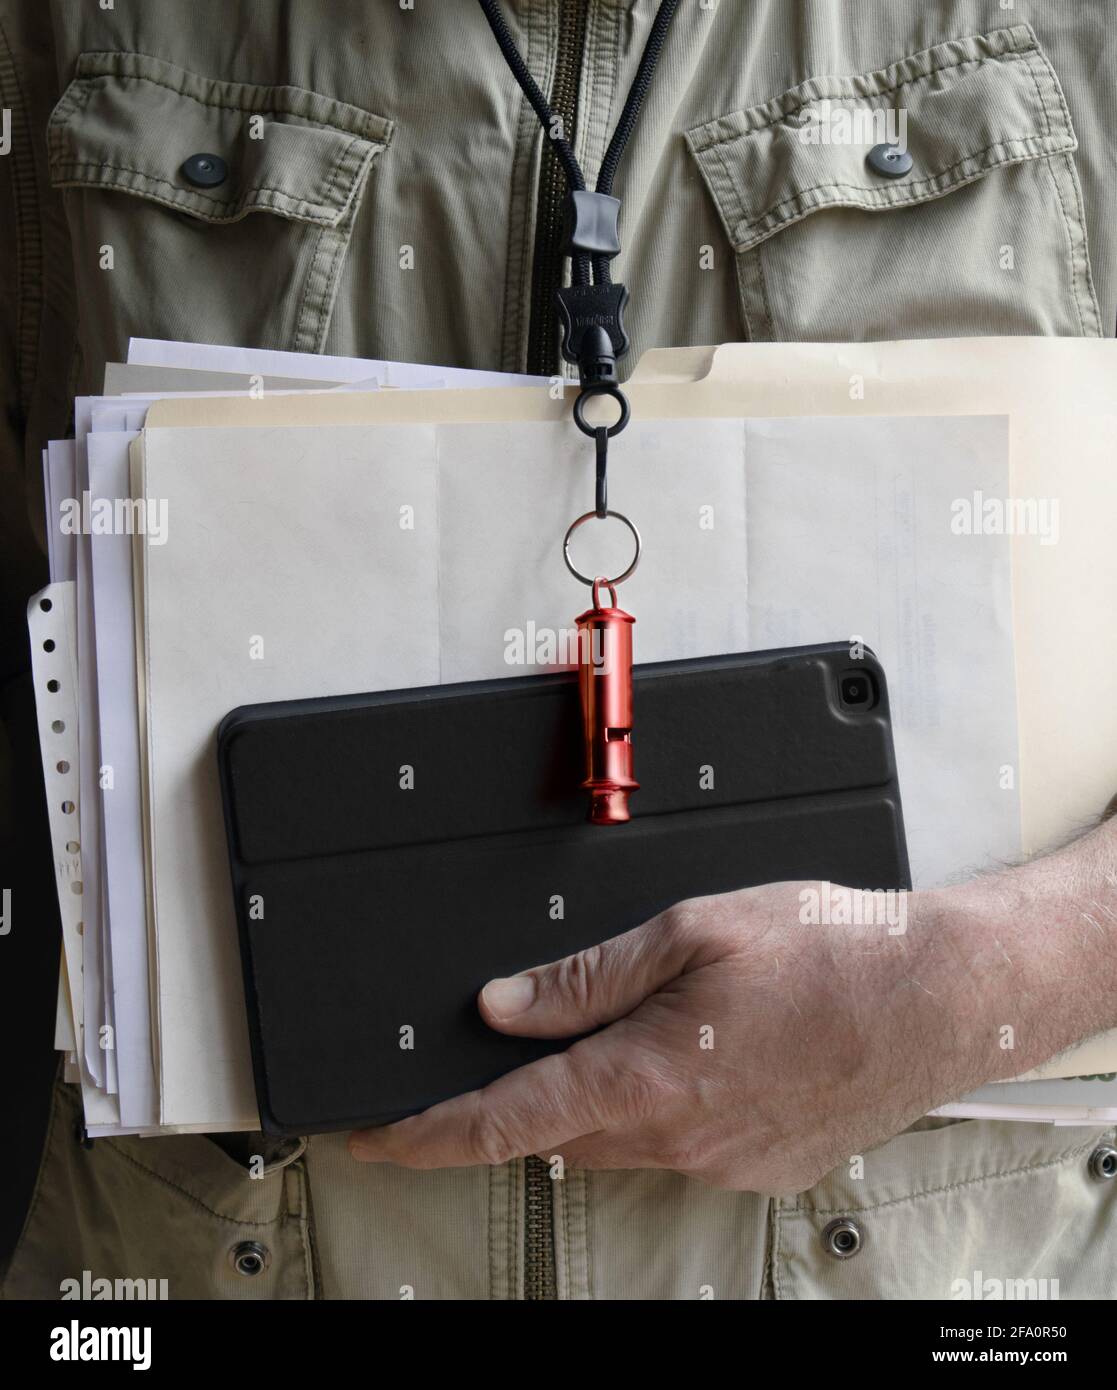 A man's hand carrying documents and an electronic tablet. From his neck hangs a red whistle, he is a wistle blower. Stock Photo